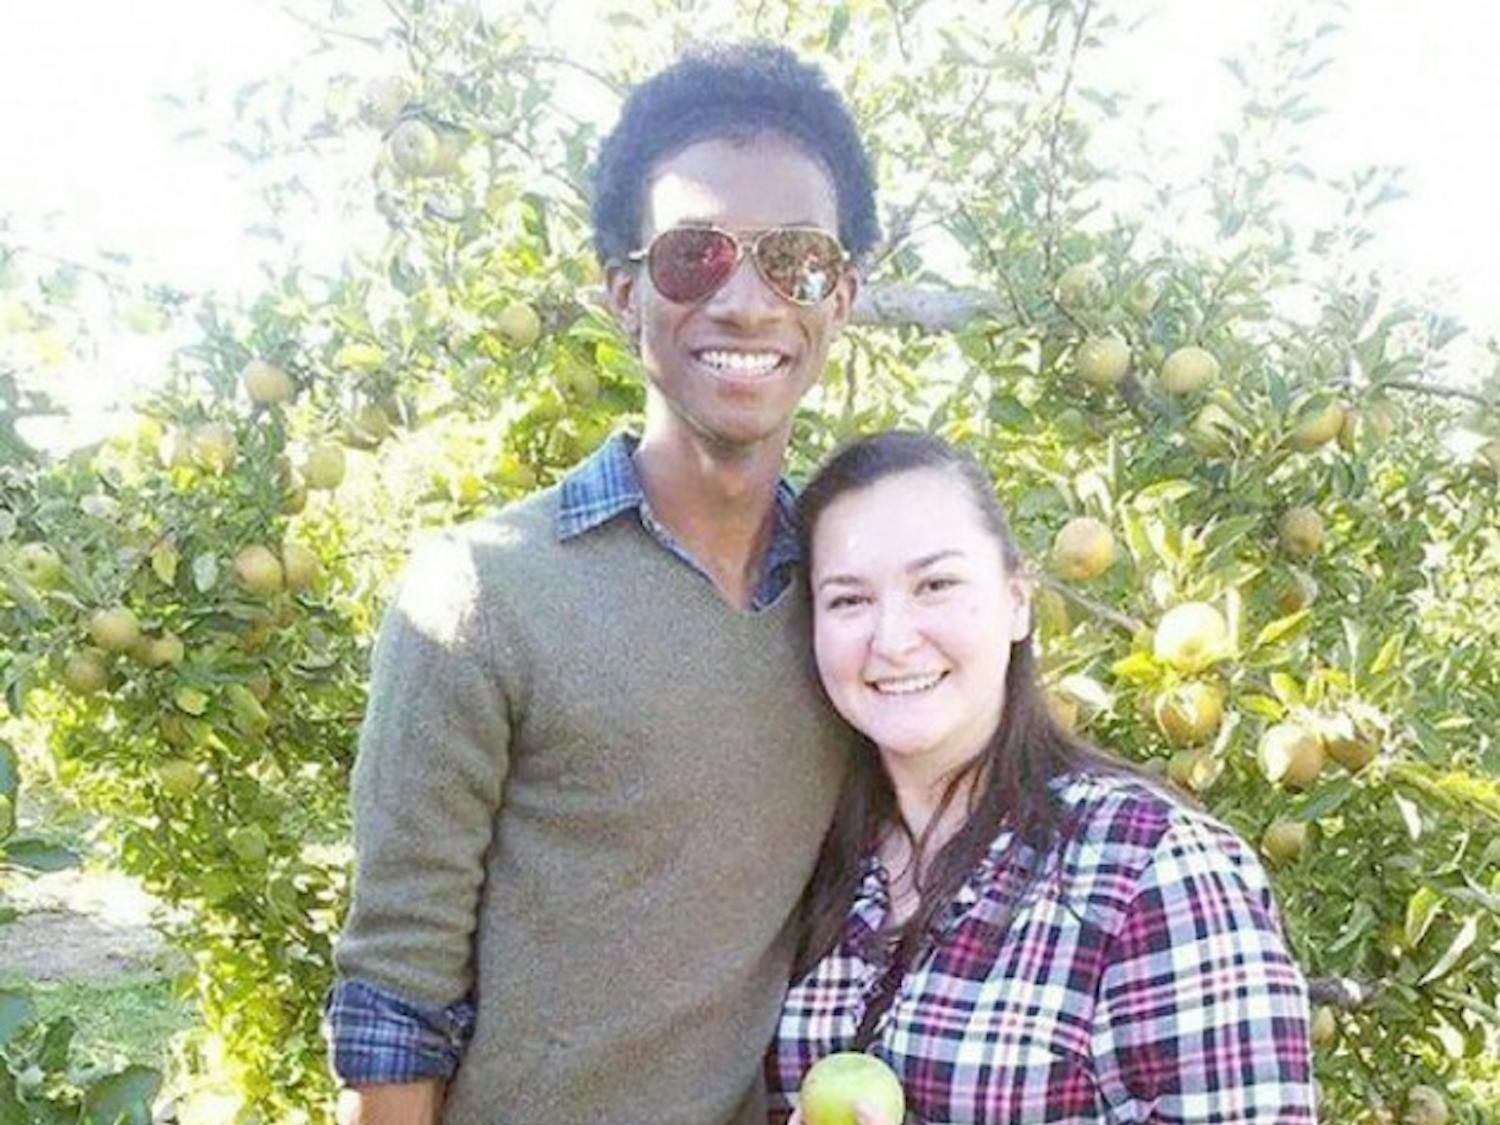 Elizabeth Chestnut, a senior French and Spanish major, and Stephen Wah, a recently graduated Interdisciplinary Degree Programs Social Sciences major, met and bonded during French class. Last fall, they went apple picking at Becker Farms.&nbsp;Courtesy of Elizabeth Chestnut&nbsp;